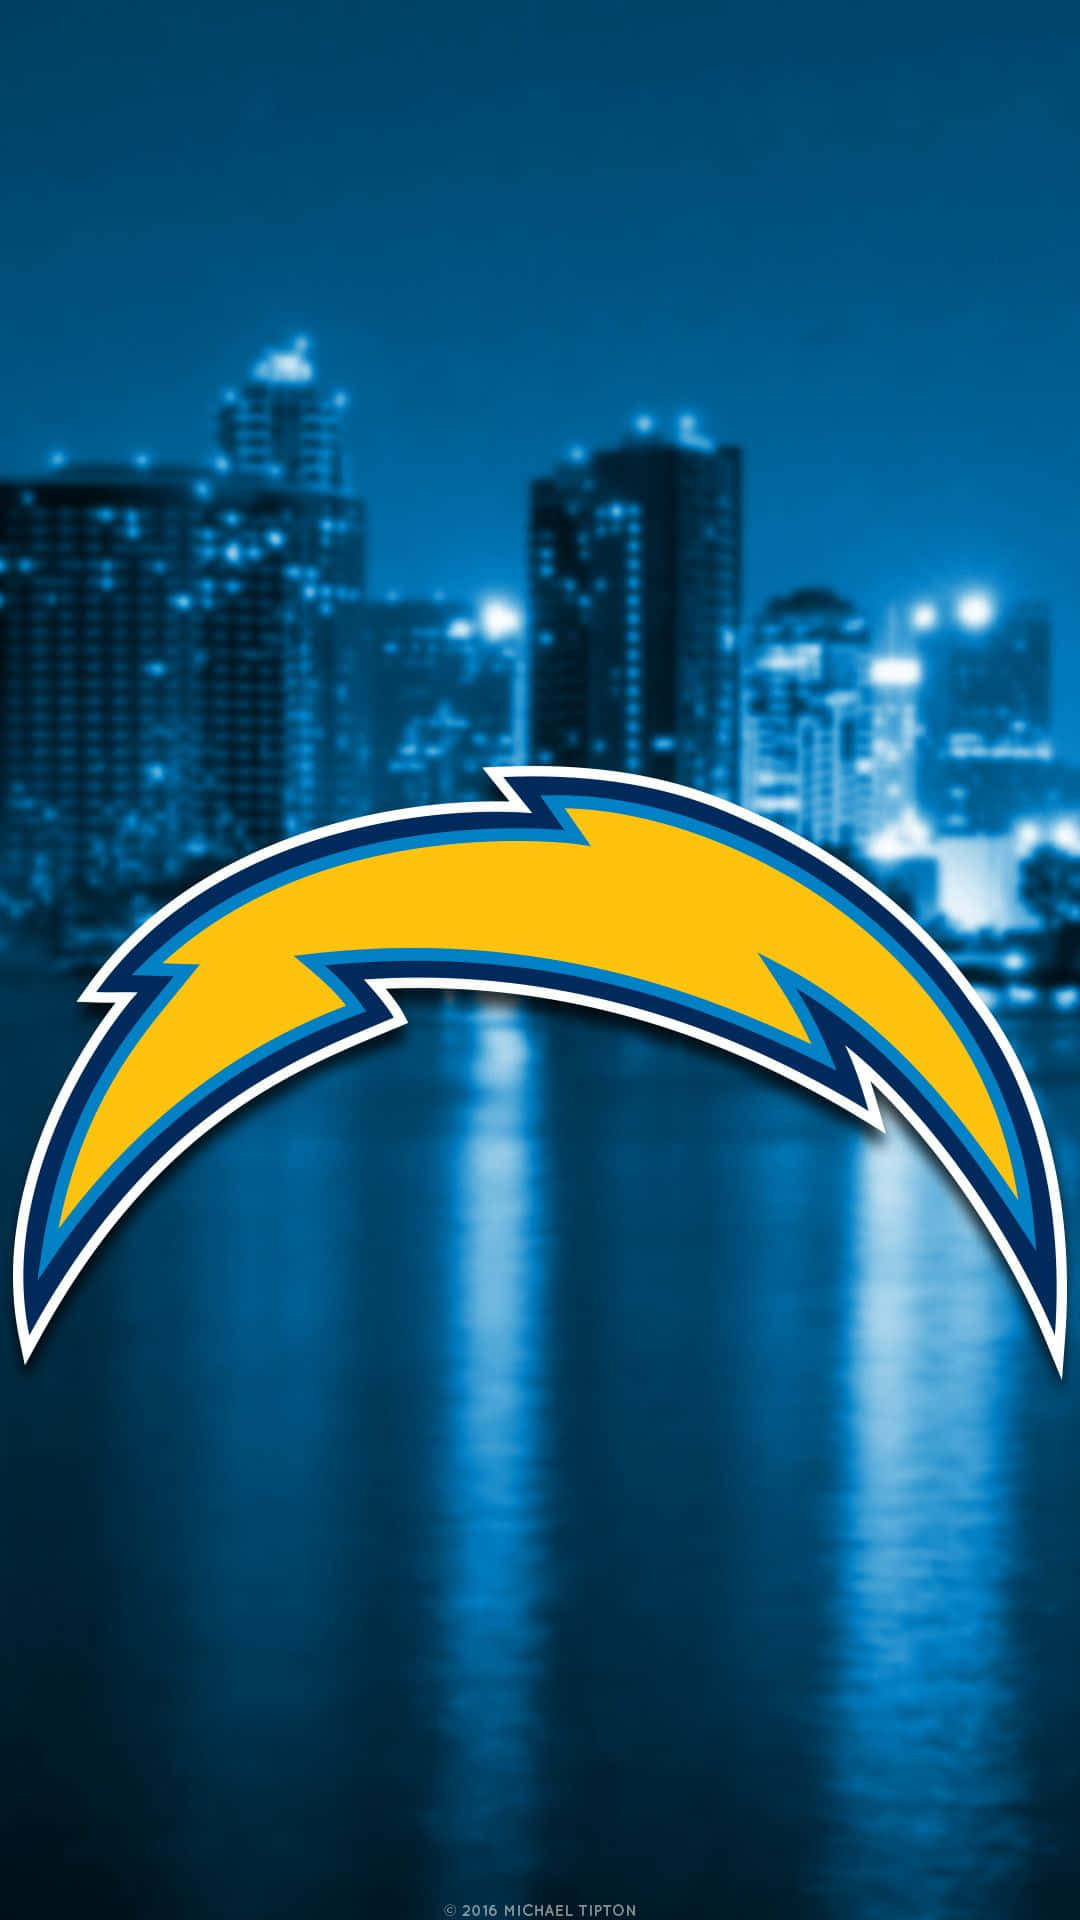 Minimalistic NFL backgrounds AFC West  Chargers nfl Chargers football  Los angeles chargers logo